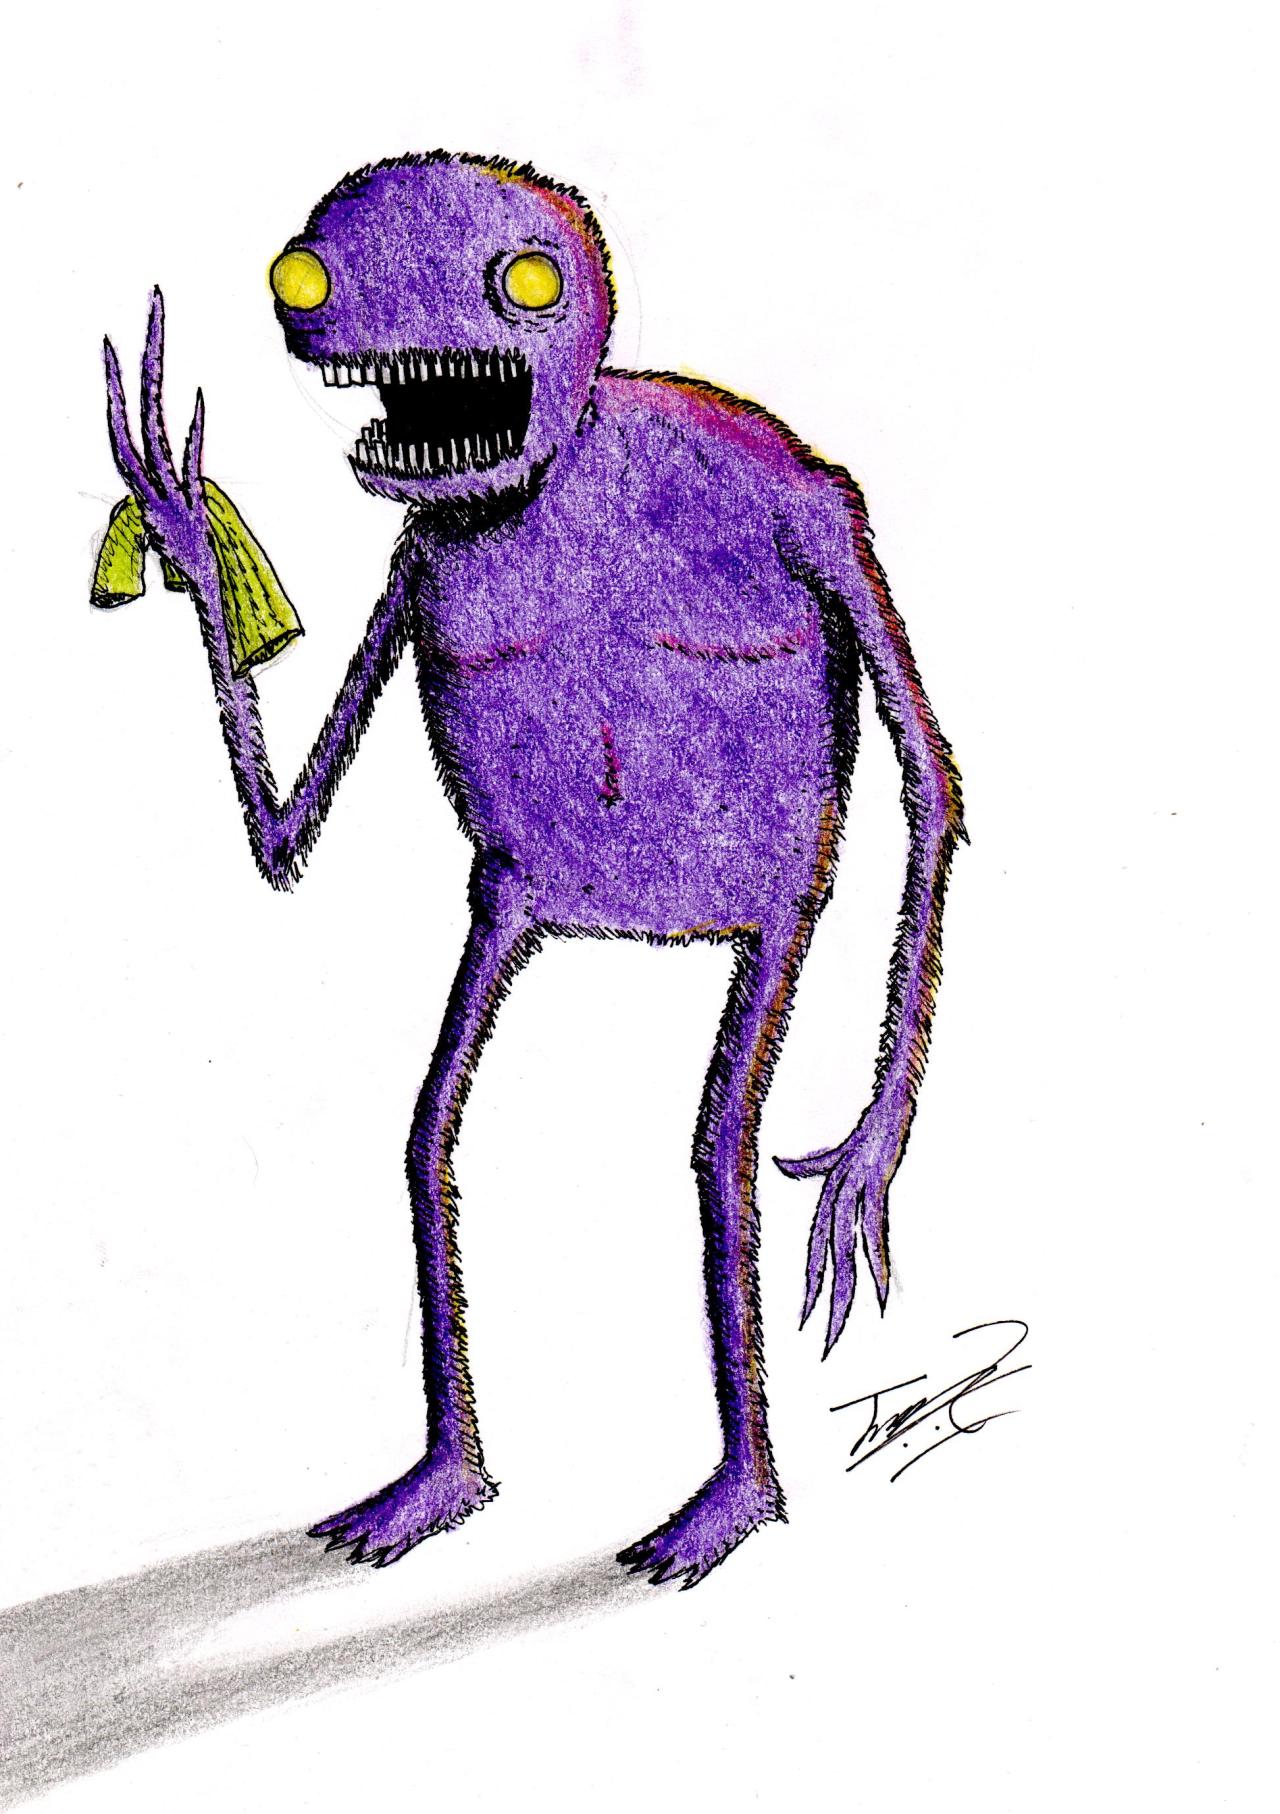 made with pen and colour pencils, Check my tumblr for more twistedknife.tumblr.com 